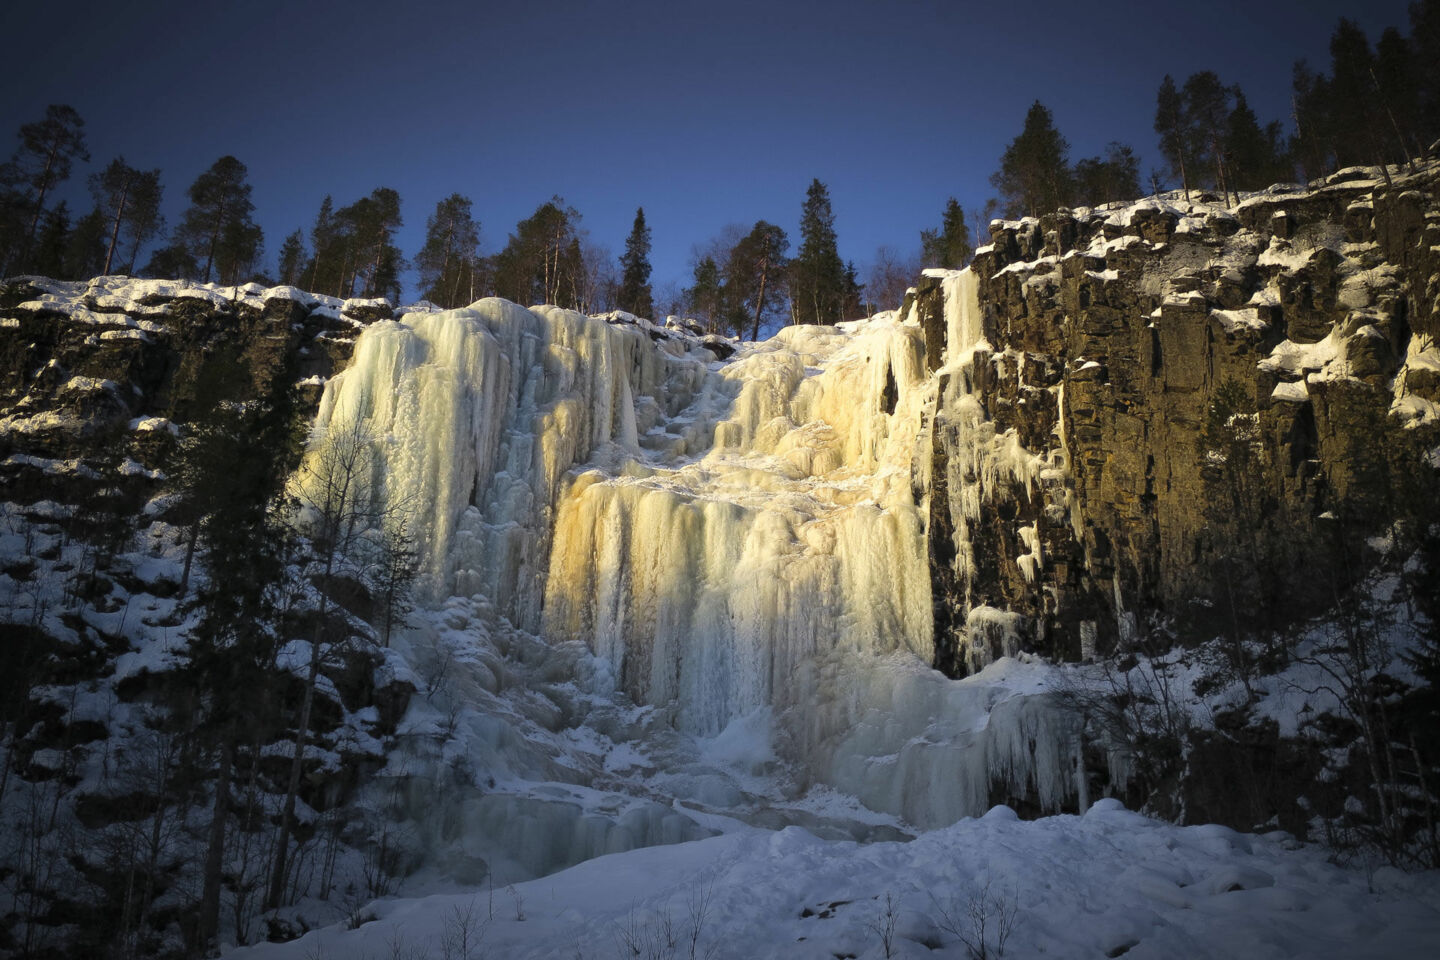 The frozen waterfall at the Korouoma Canyon in Posio, a Finnish Lapland filming location